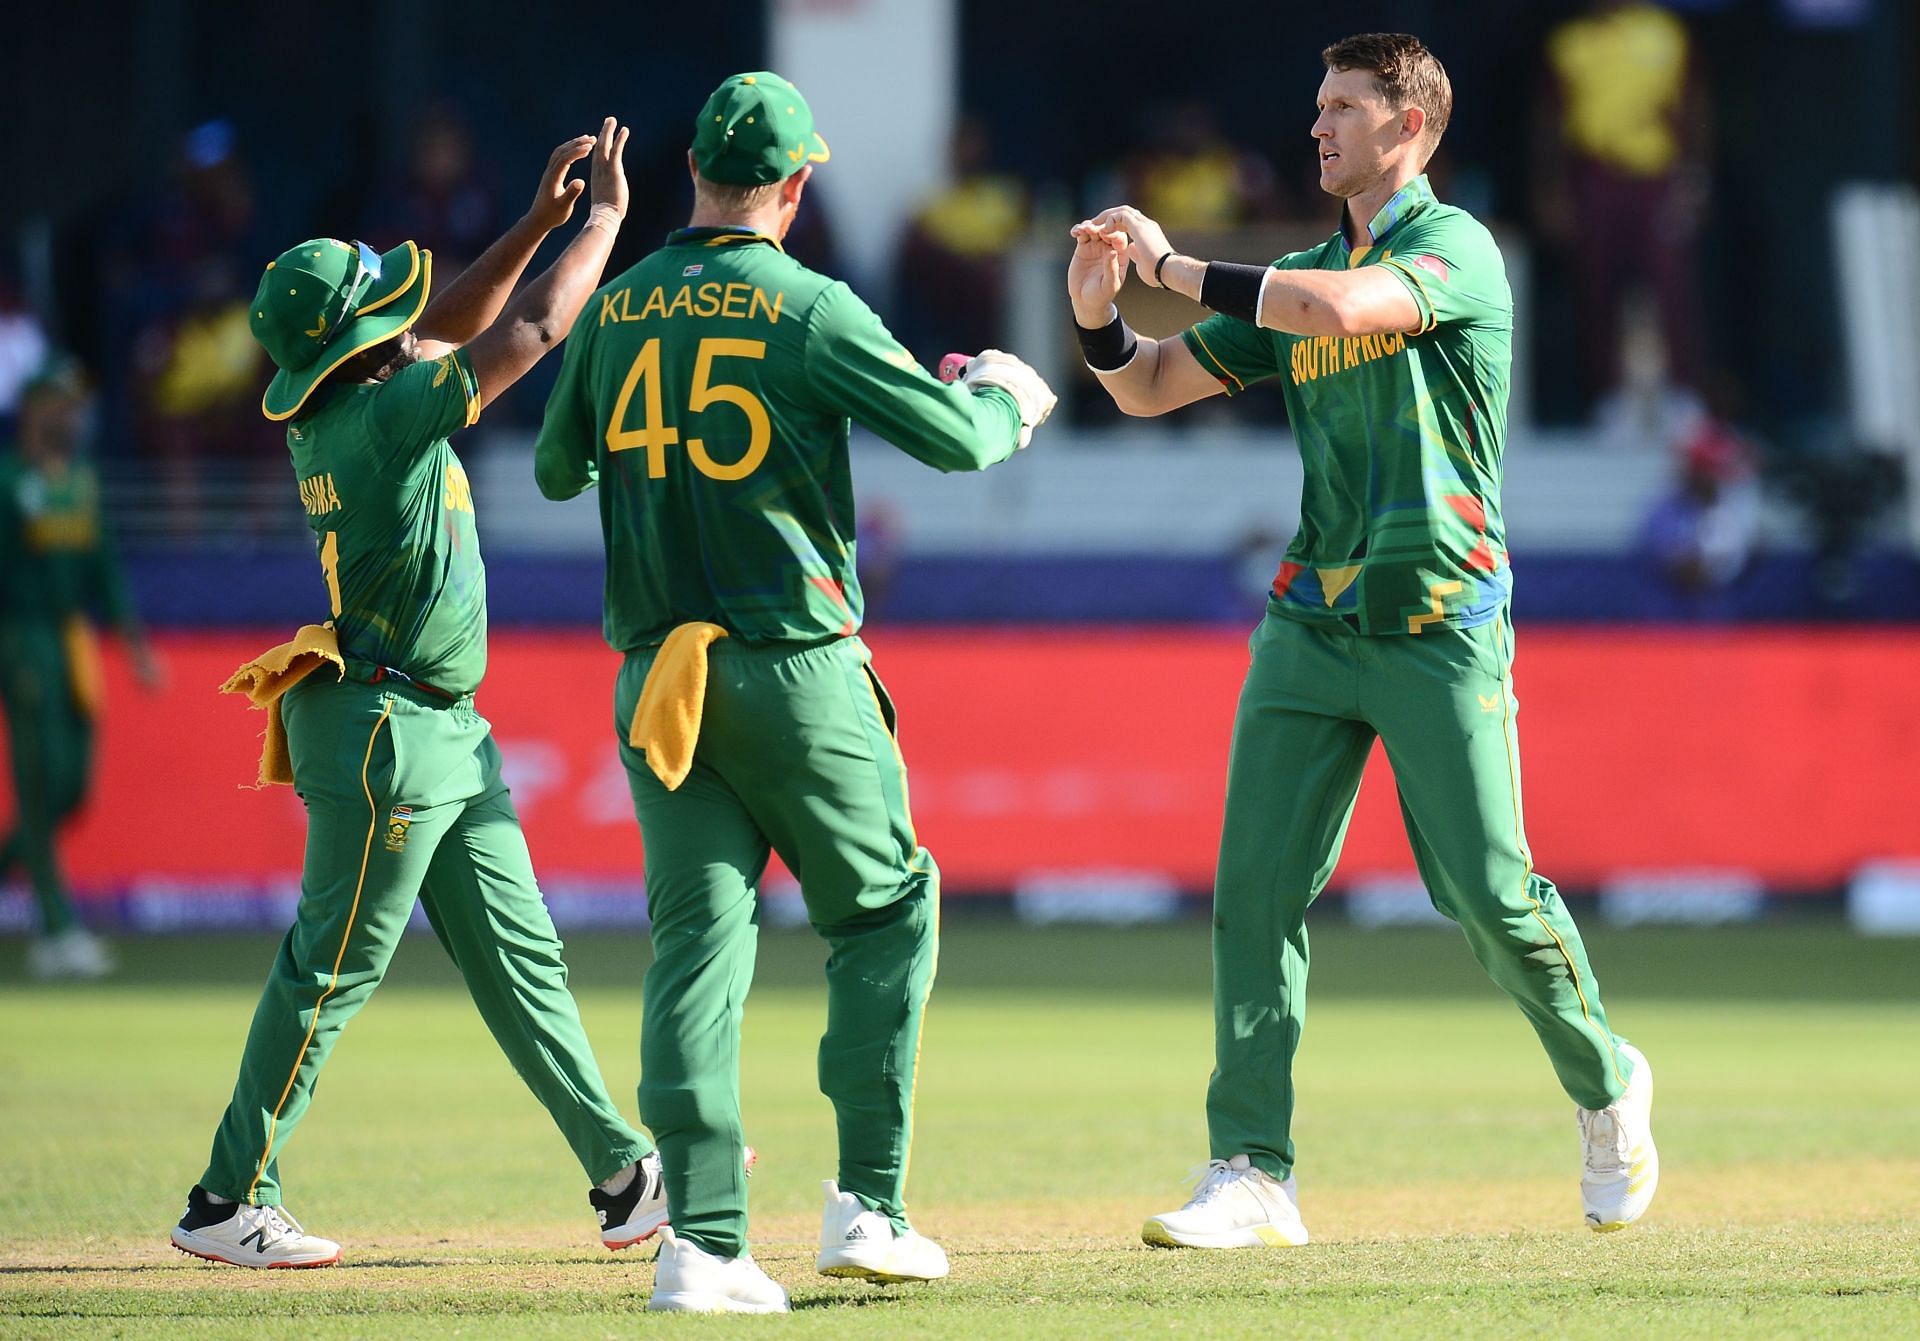 Dwaine Pretorius (R) of South Africa celebrates a wicket. Pic: Getty Images